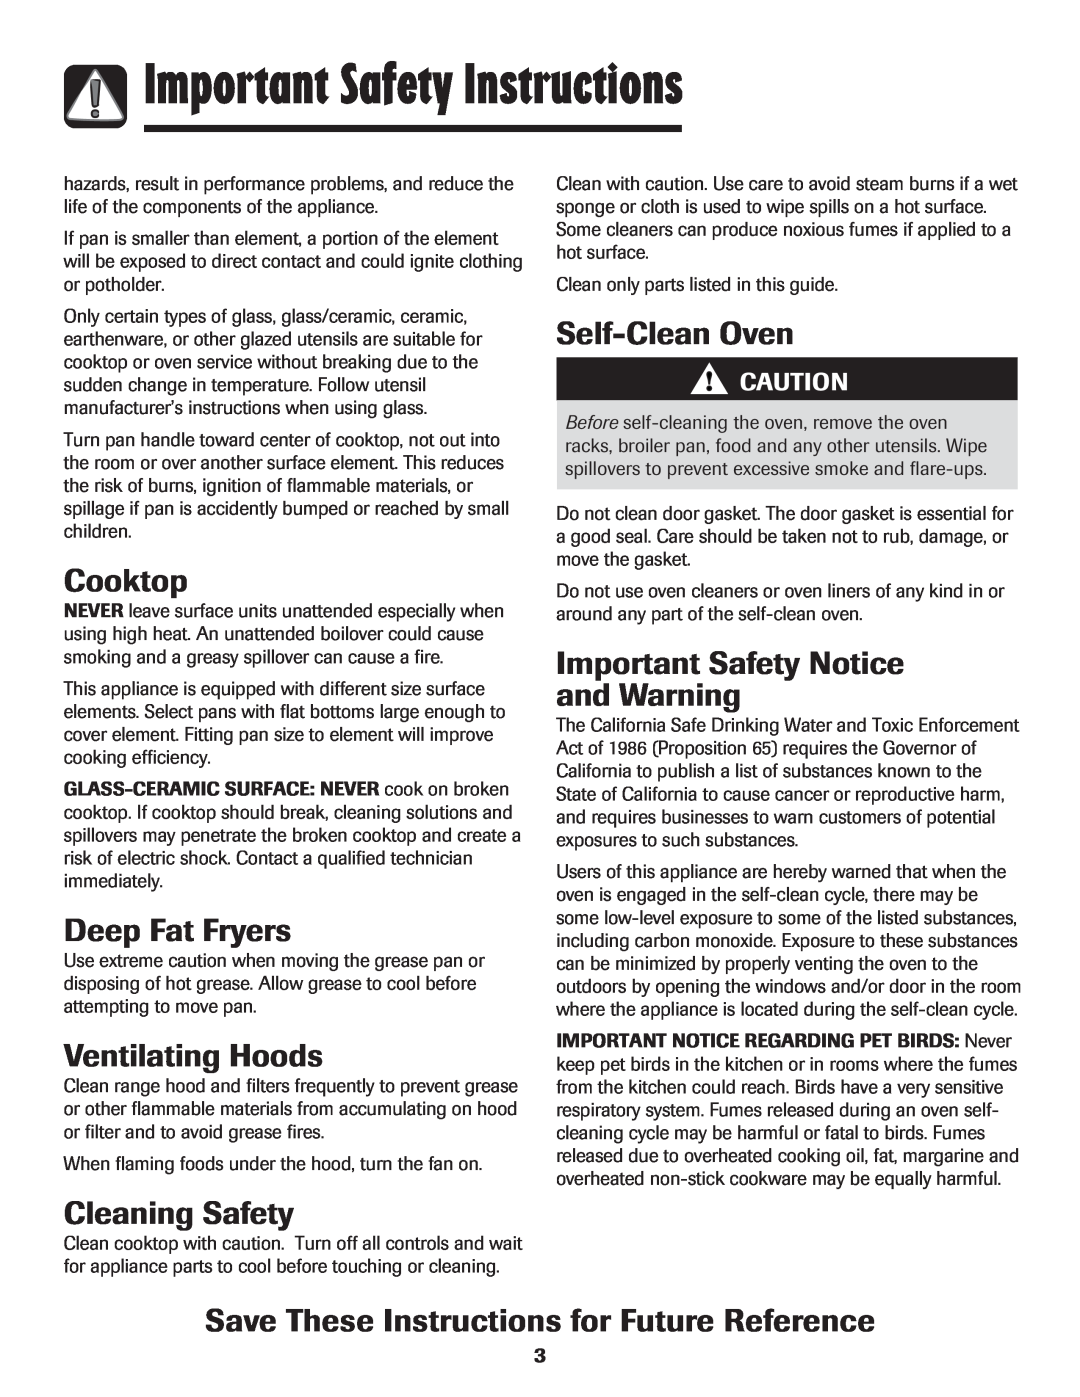 Maytag Range Cooktop, Deep Fat Fryers, Ventilating Hoods, Self-CleanOven, Important Safety Notice and Warning 